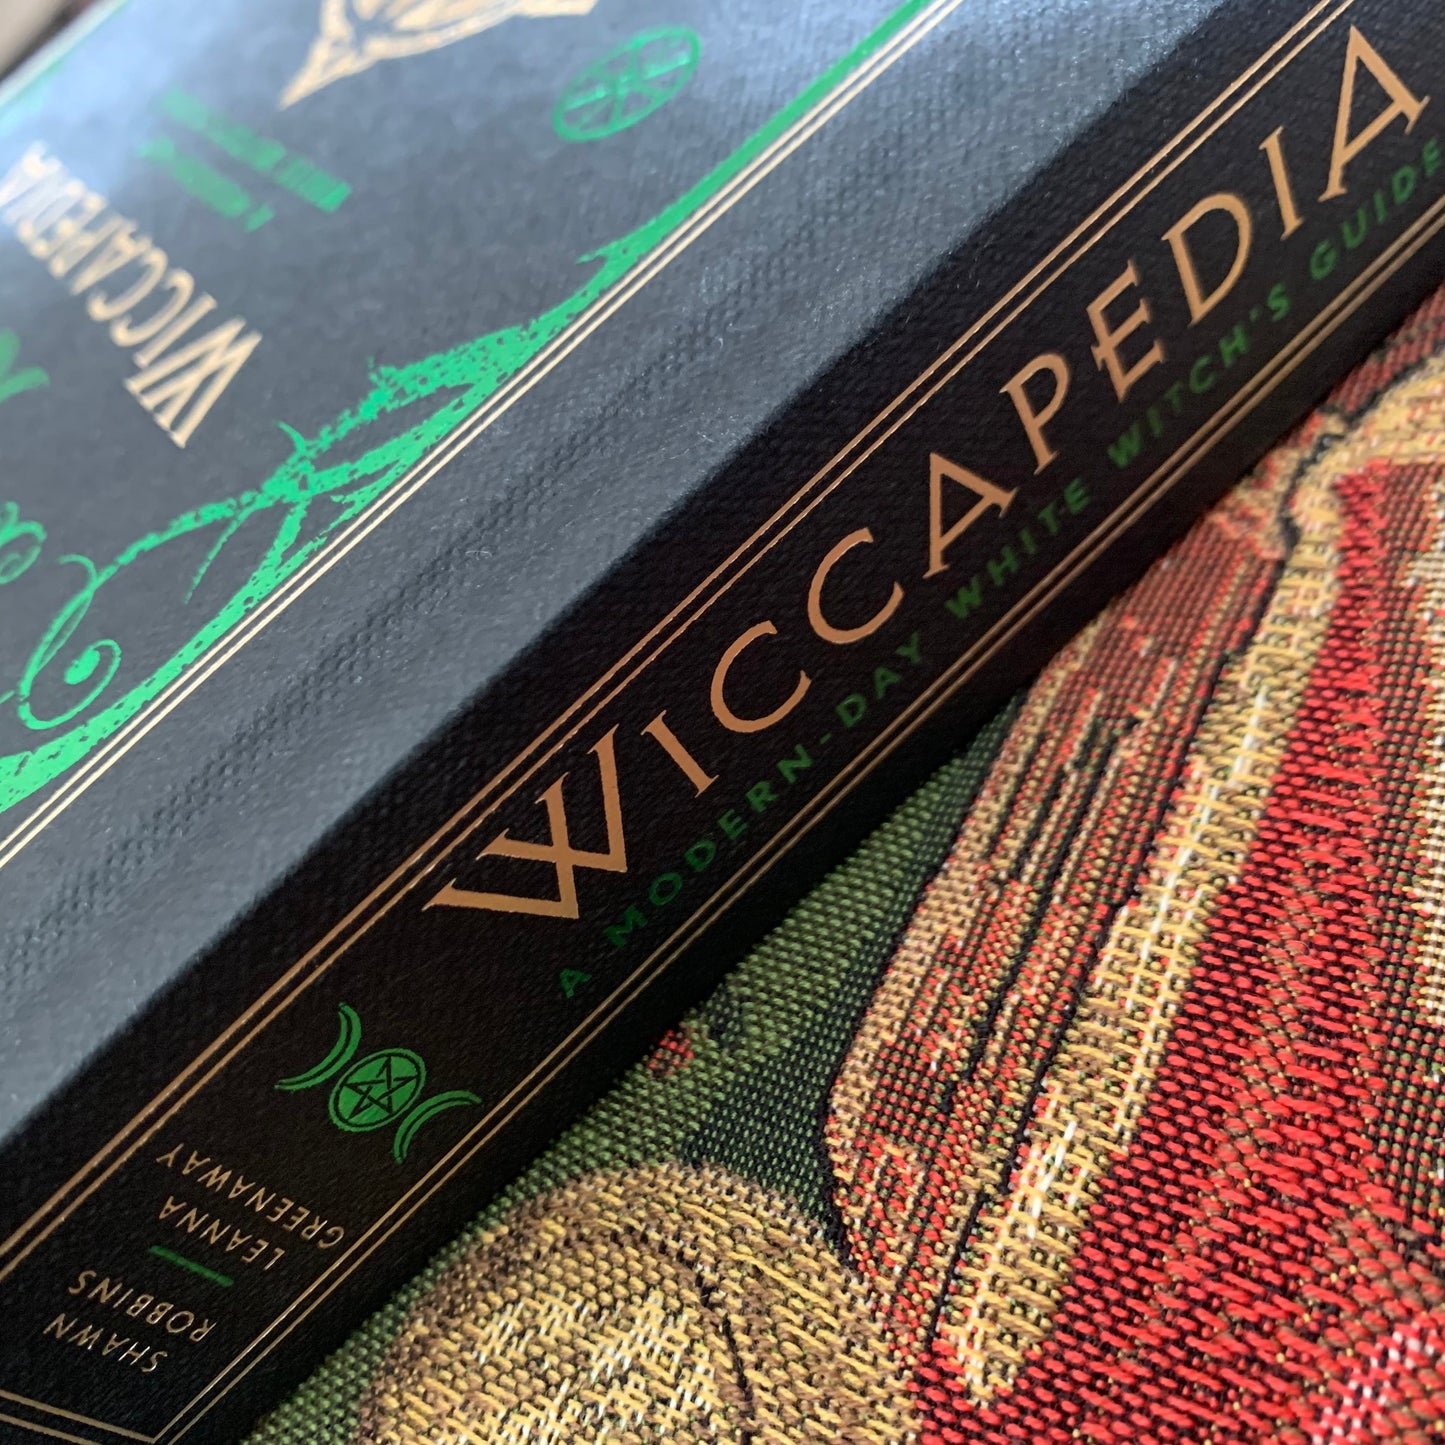 WICCAPEDIA (HARDCOVER)- A MODERN -DAY WHITE WITCH'S GUIDE